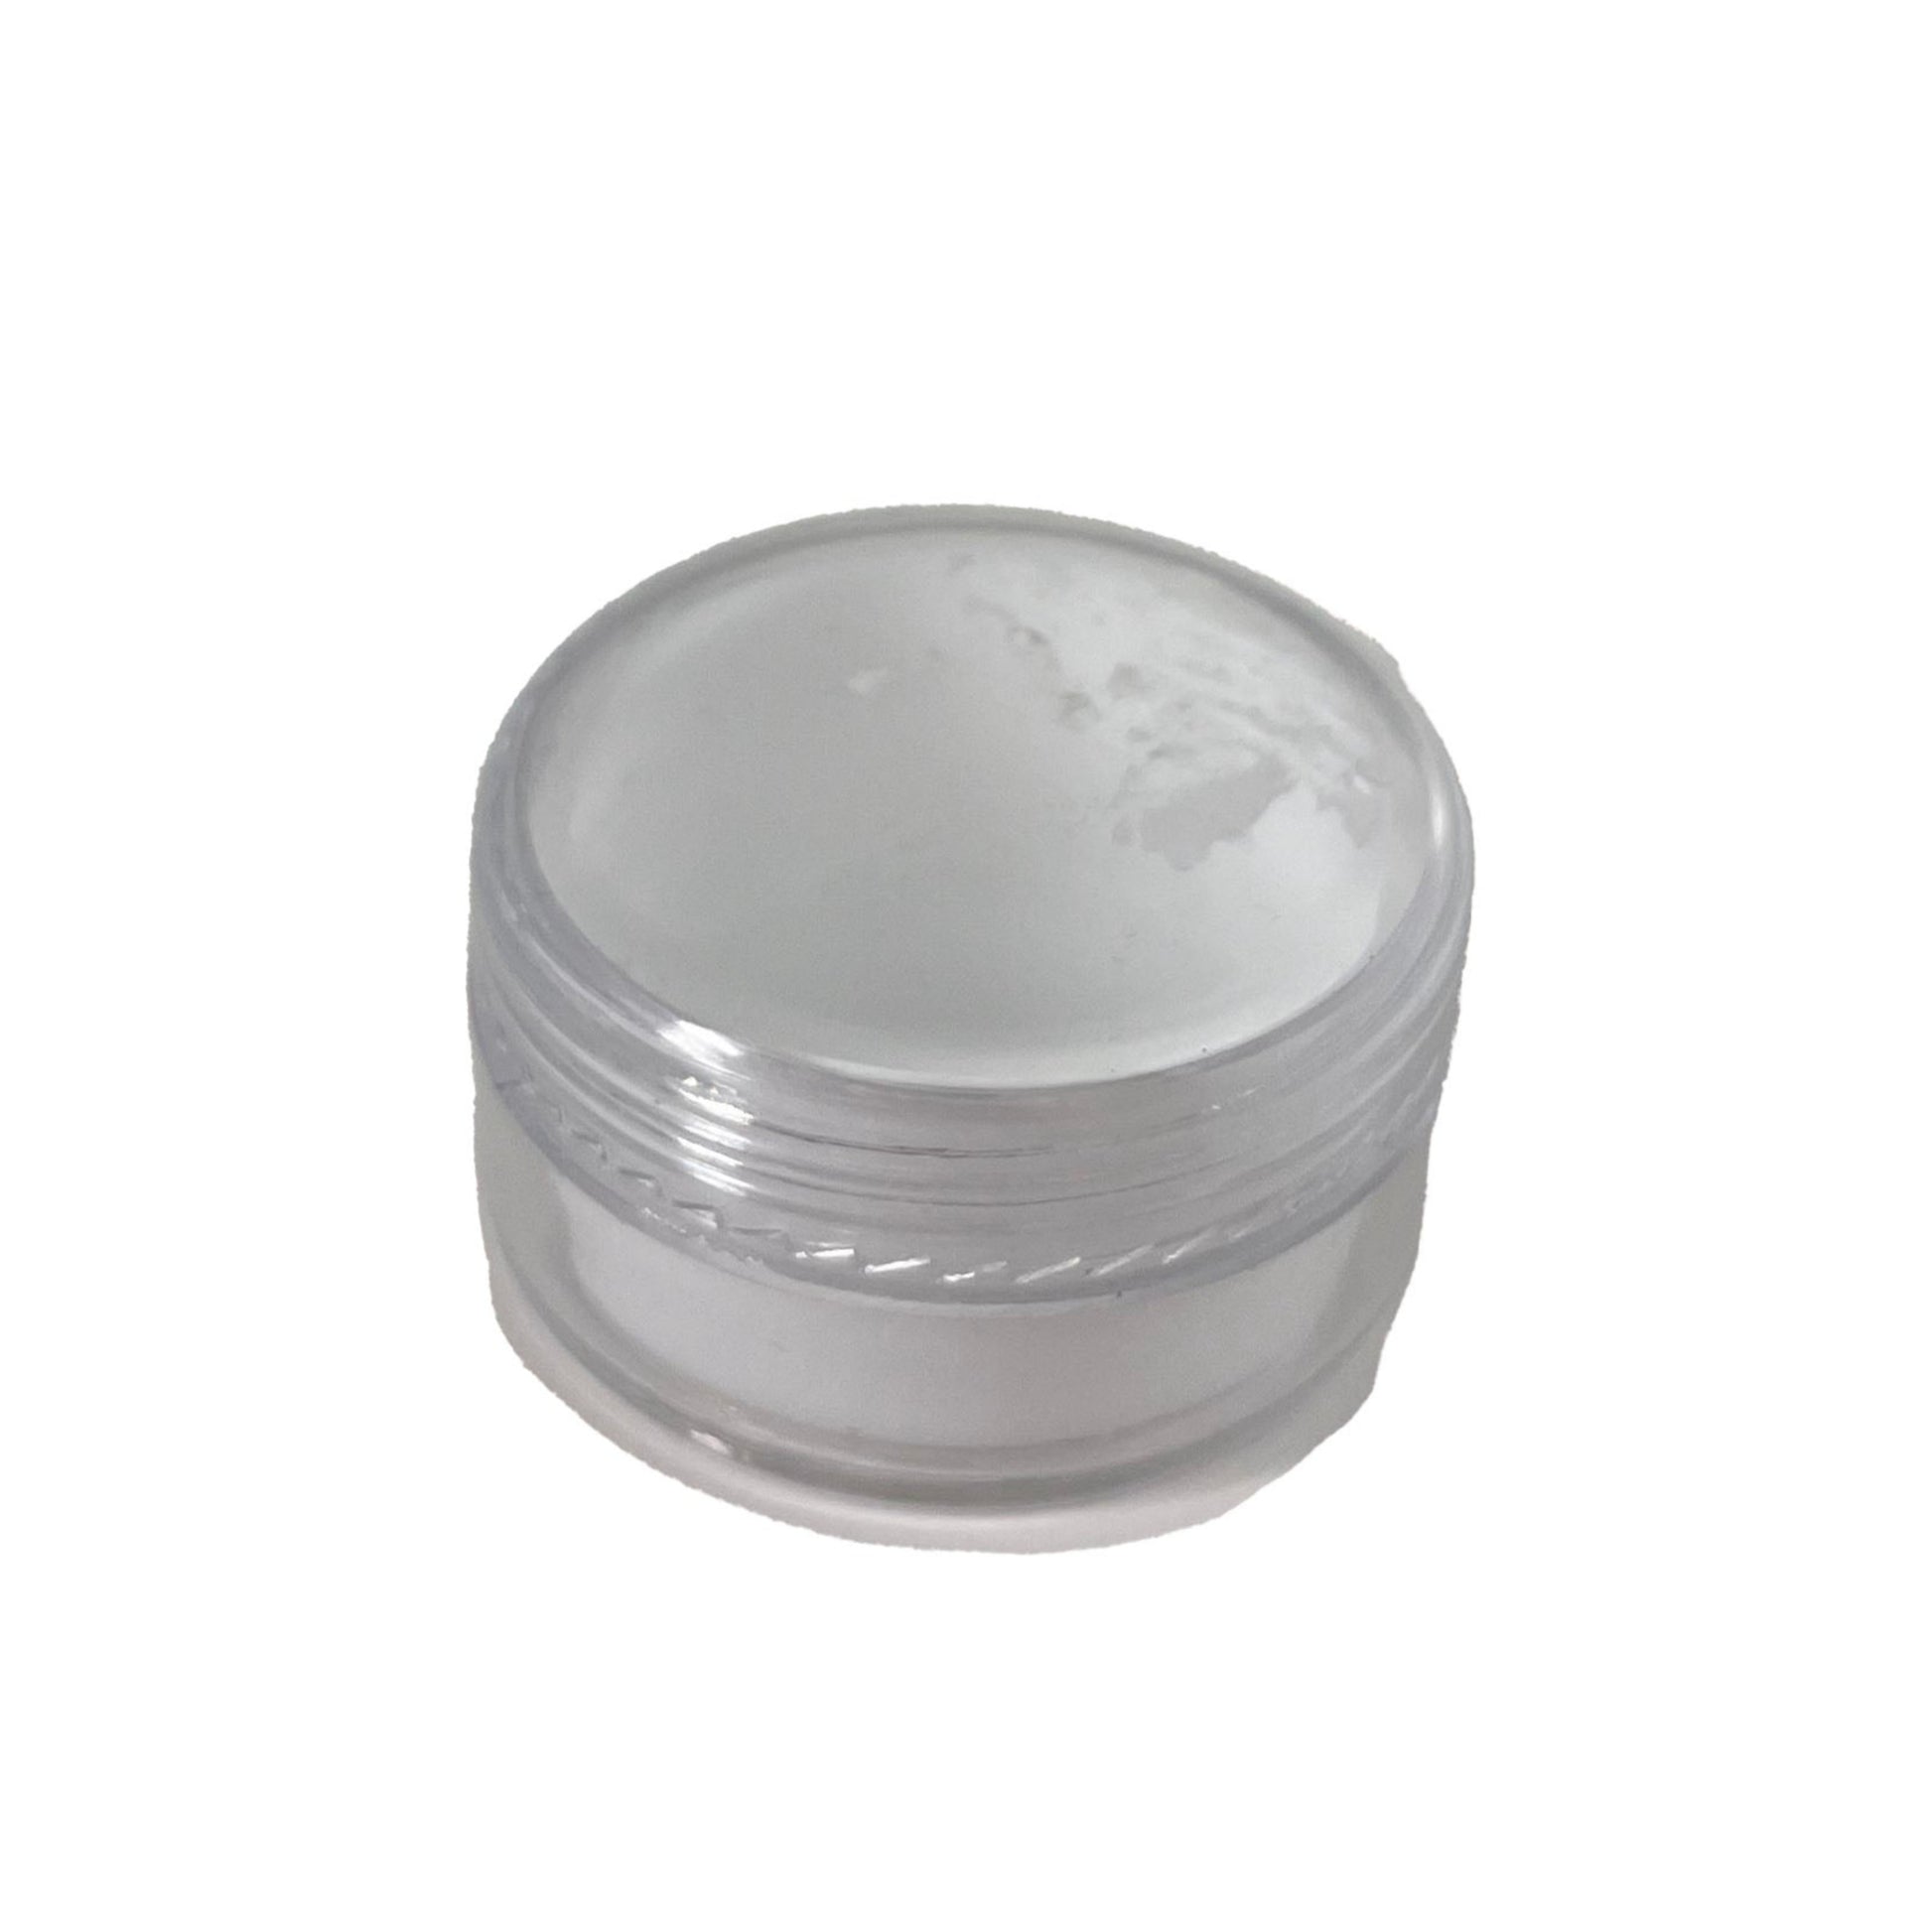 10 ml Plastic Jar with White Silicon Insert